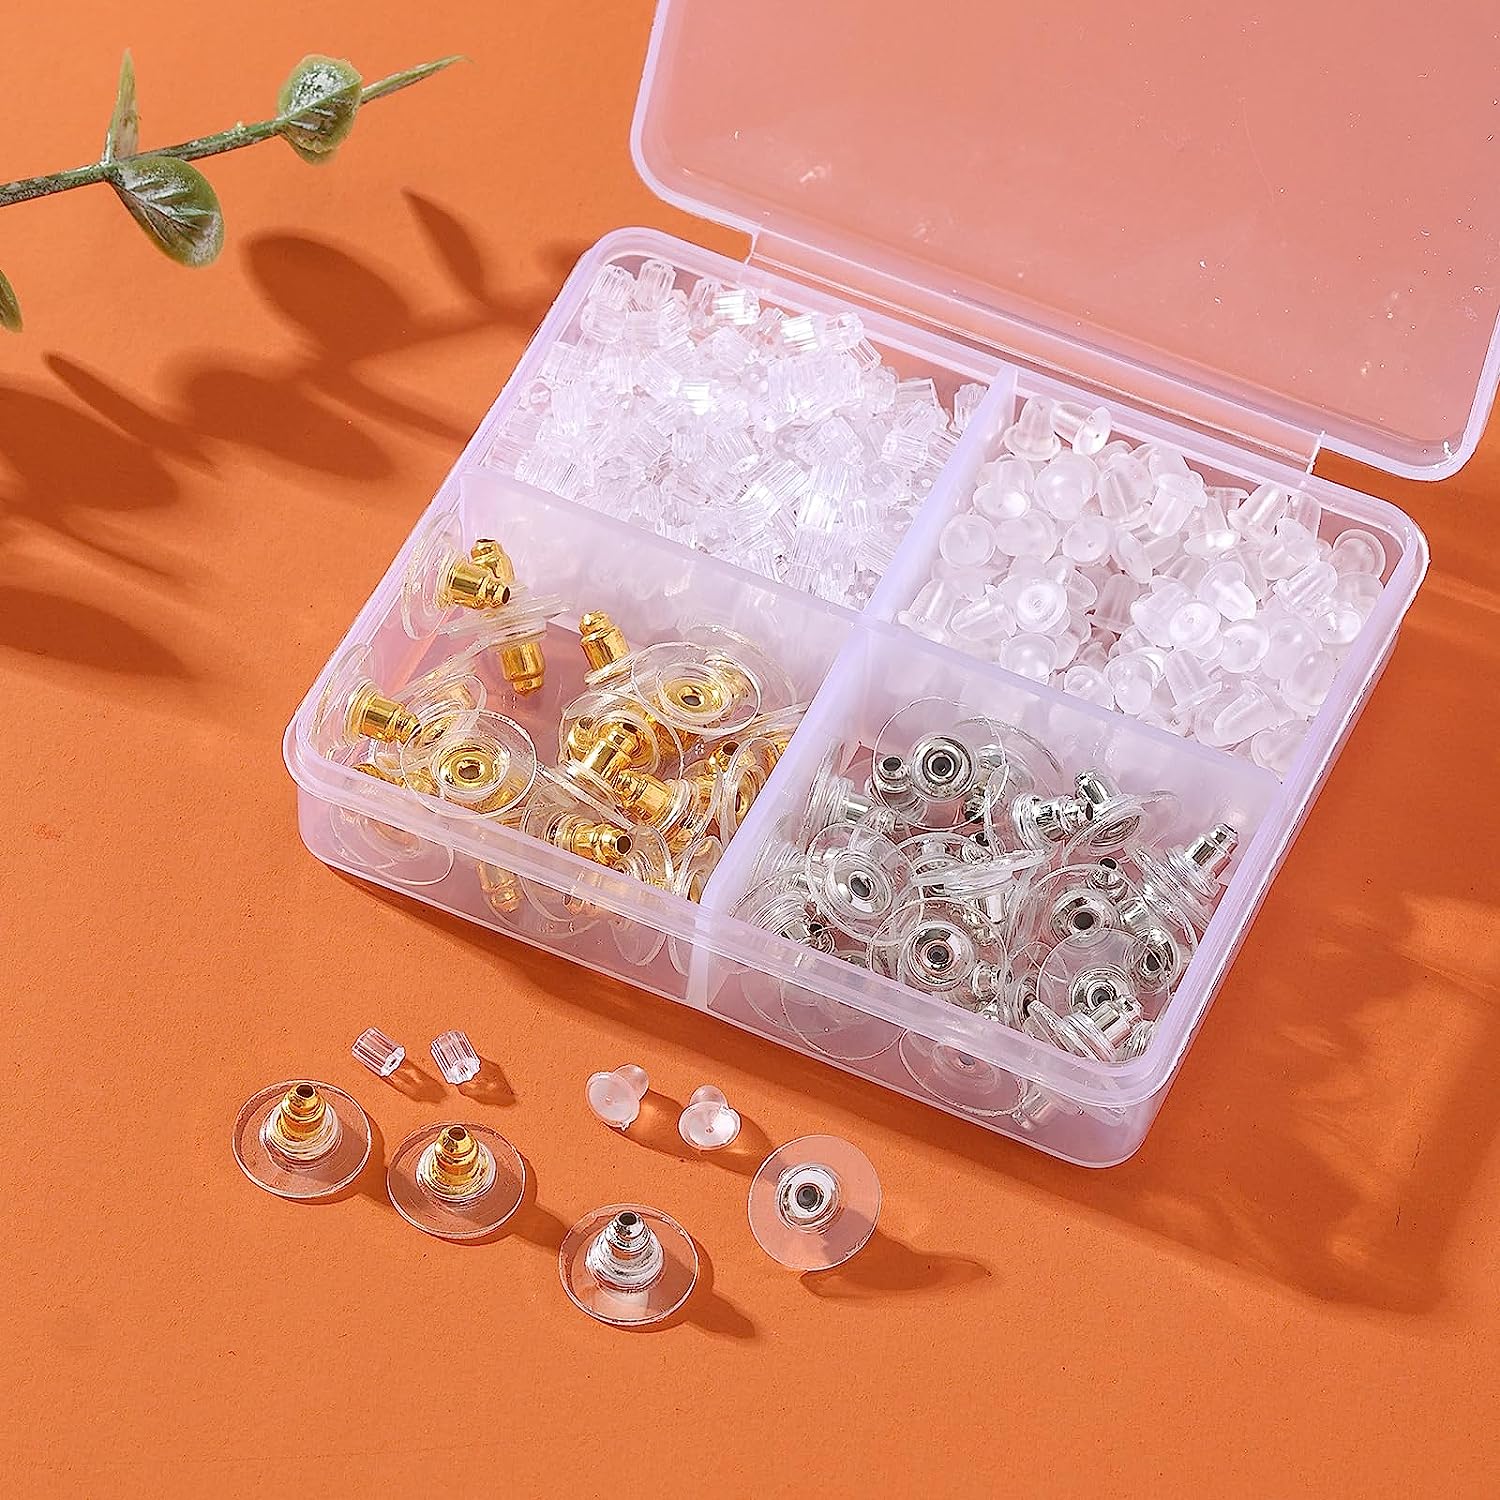 Silicone Earring Backs, 800 Pcs Soft Rubber Earring Stoppers, Clear Earring  Backing Replacement for Stud Post Fishhook Earrings(4 Styles)